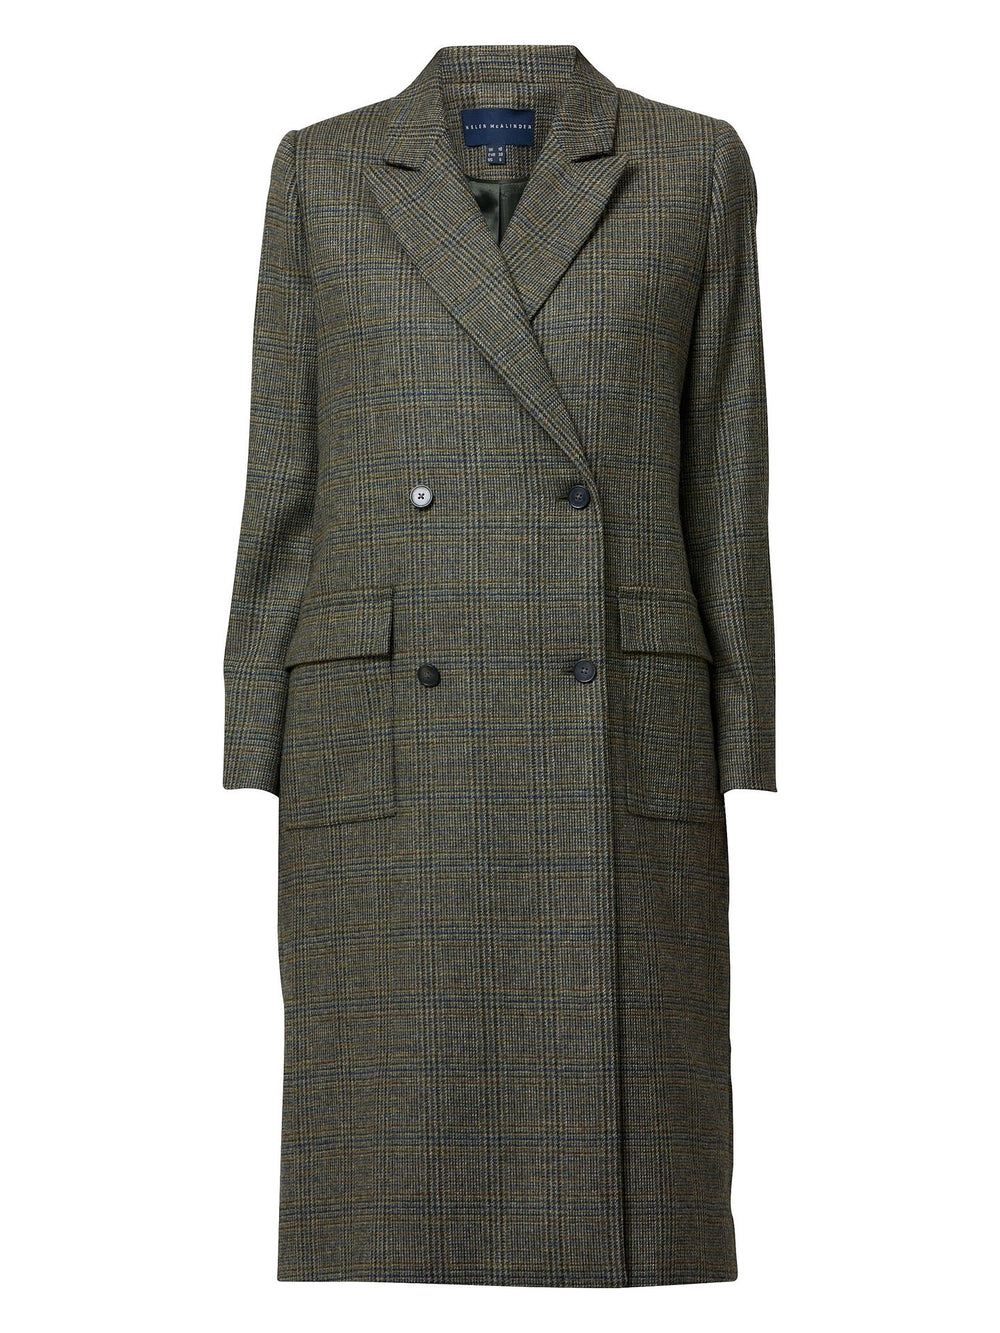 Introducing Victoria, a contemporary twist on our beloved heritage tweed, infused with an irresistible 80's vibe. This double-breasted coat features concealed fastenings, patch pockets and falls below the knee, exuding a timeless elegance. With a confident swagger for the new season, Victoria offers unmatched versatility as it effortlessly complements any ensemble.